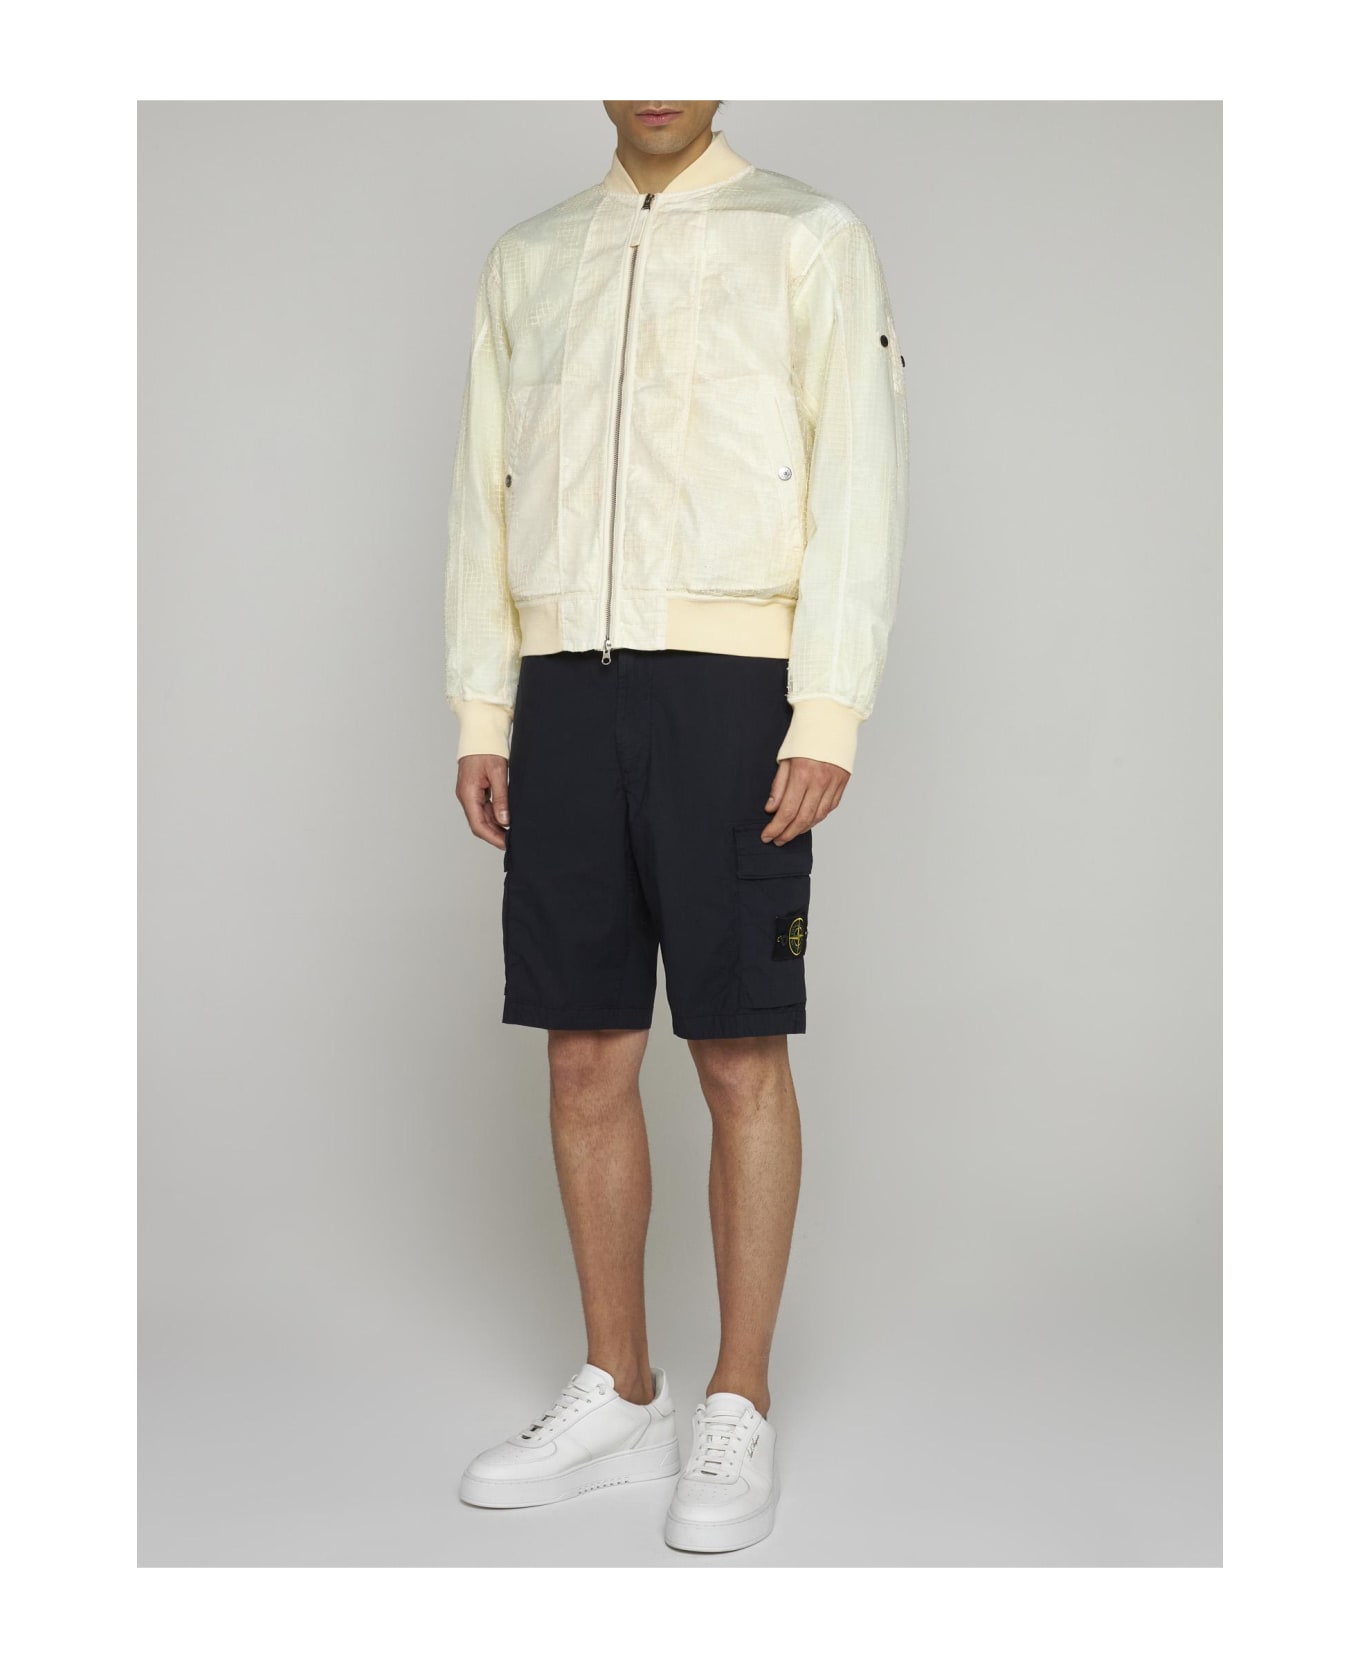 Stone Island Shadow Project Technical Cotton Blend Bomber Jacket - Pale yellow ジャケット